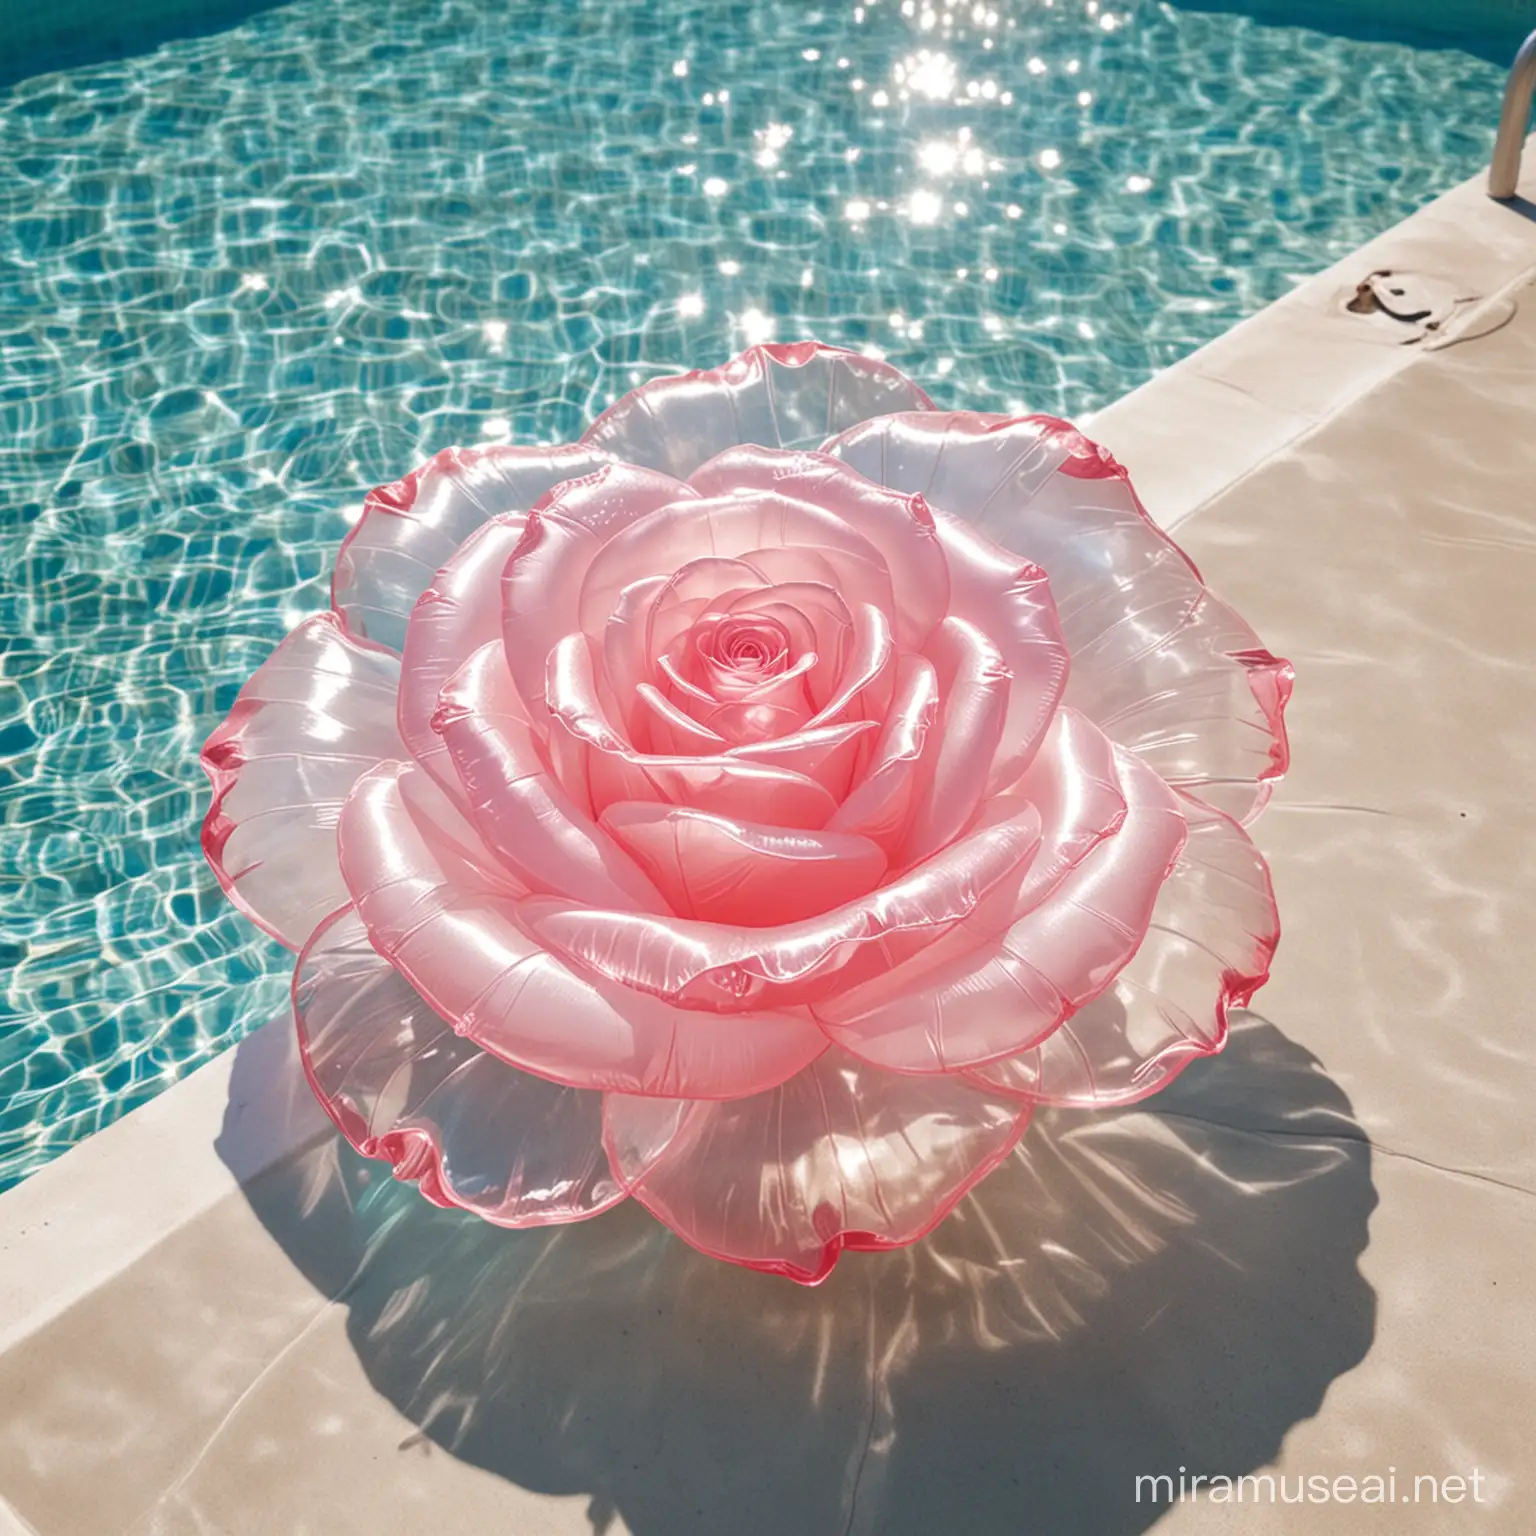 Clear plastic inflatable rose in pool.
Soft sun light comes from the right.